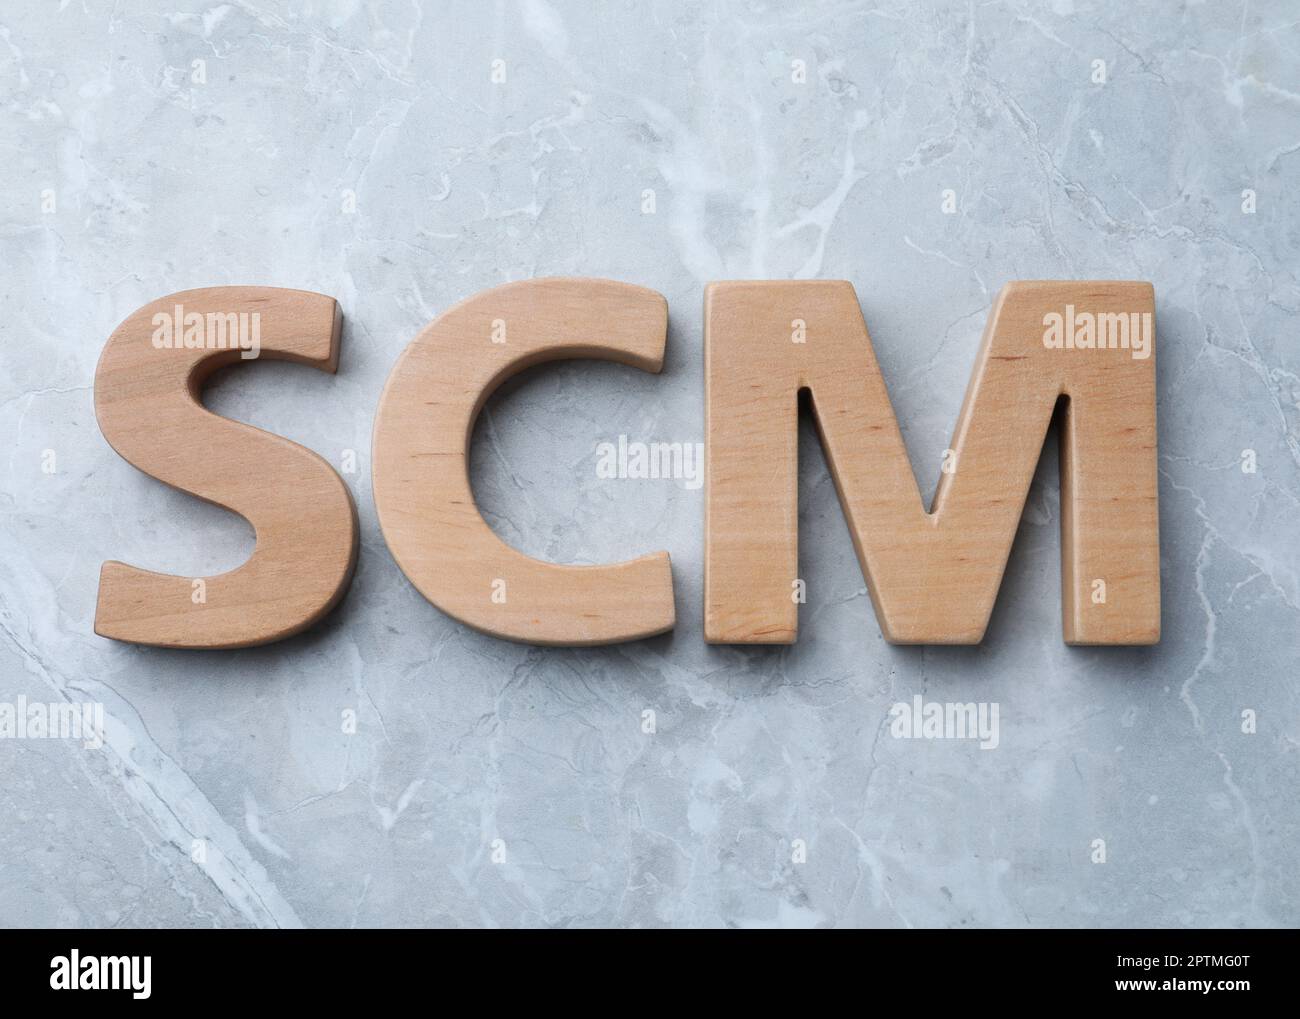 Abbreviation SCM (Supply Chain Management) made of wooden letters on light grey marble background, flat lay Stock Photo